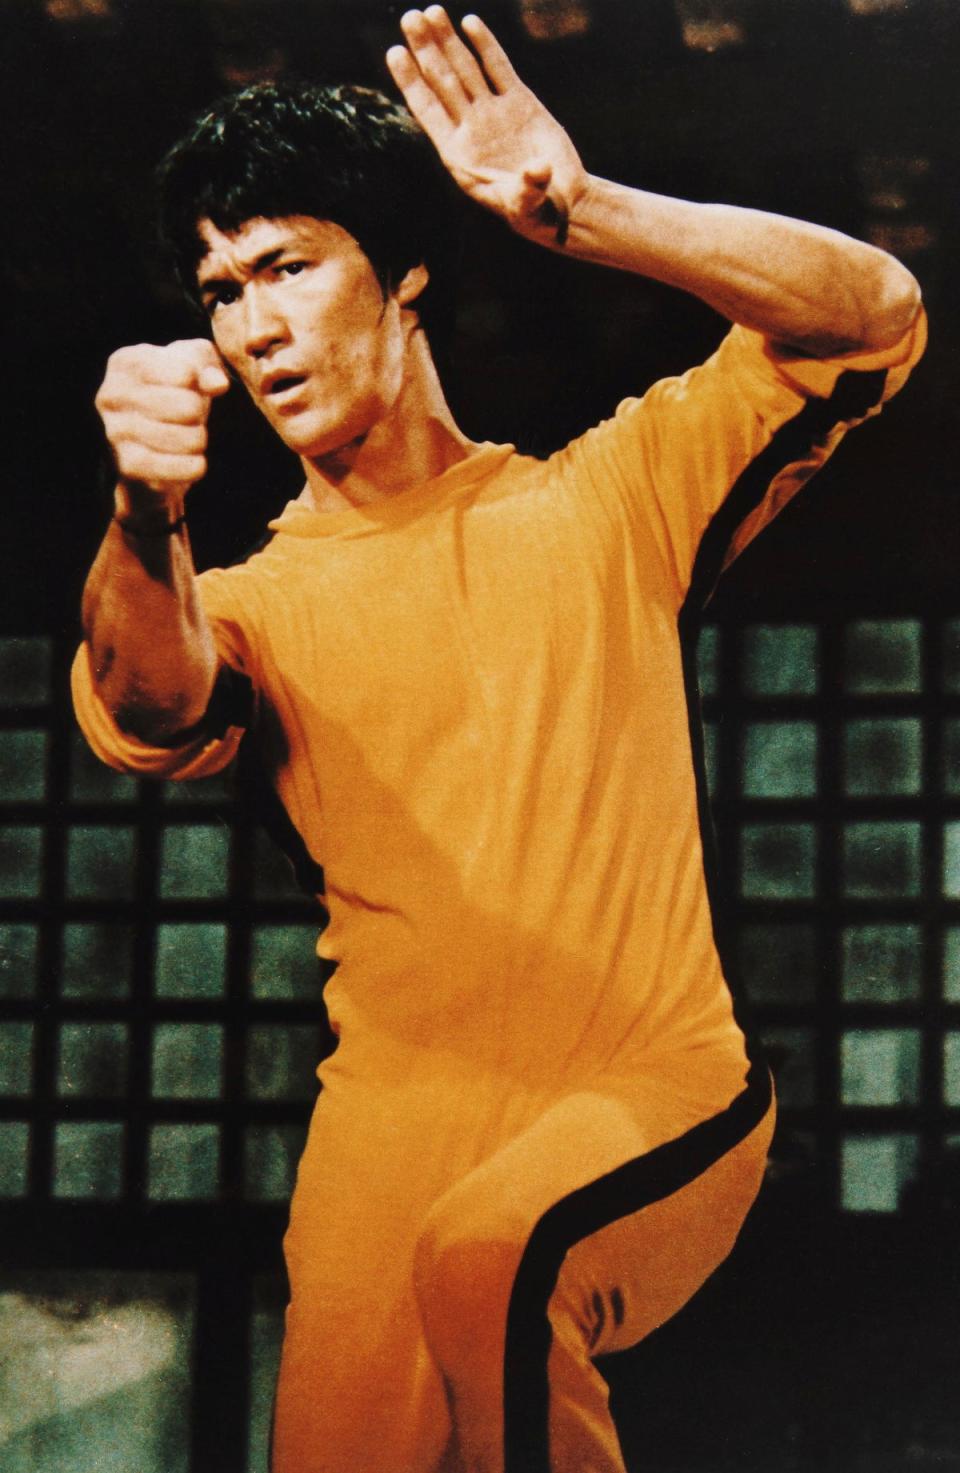 Bruce Lee sporting a yellow jumpsuit – later emulated in Quentin Tarantino’s ‘Kill Bill’ – in the ultimately unfinished film ‘Game of Death’ (Shutterstock)